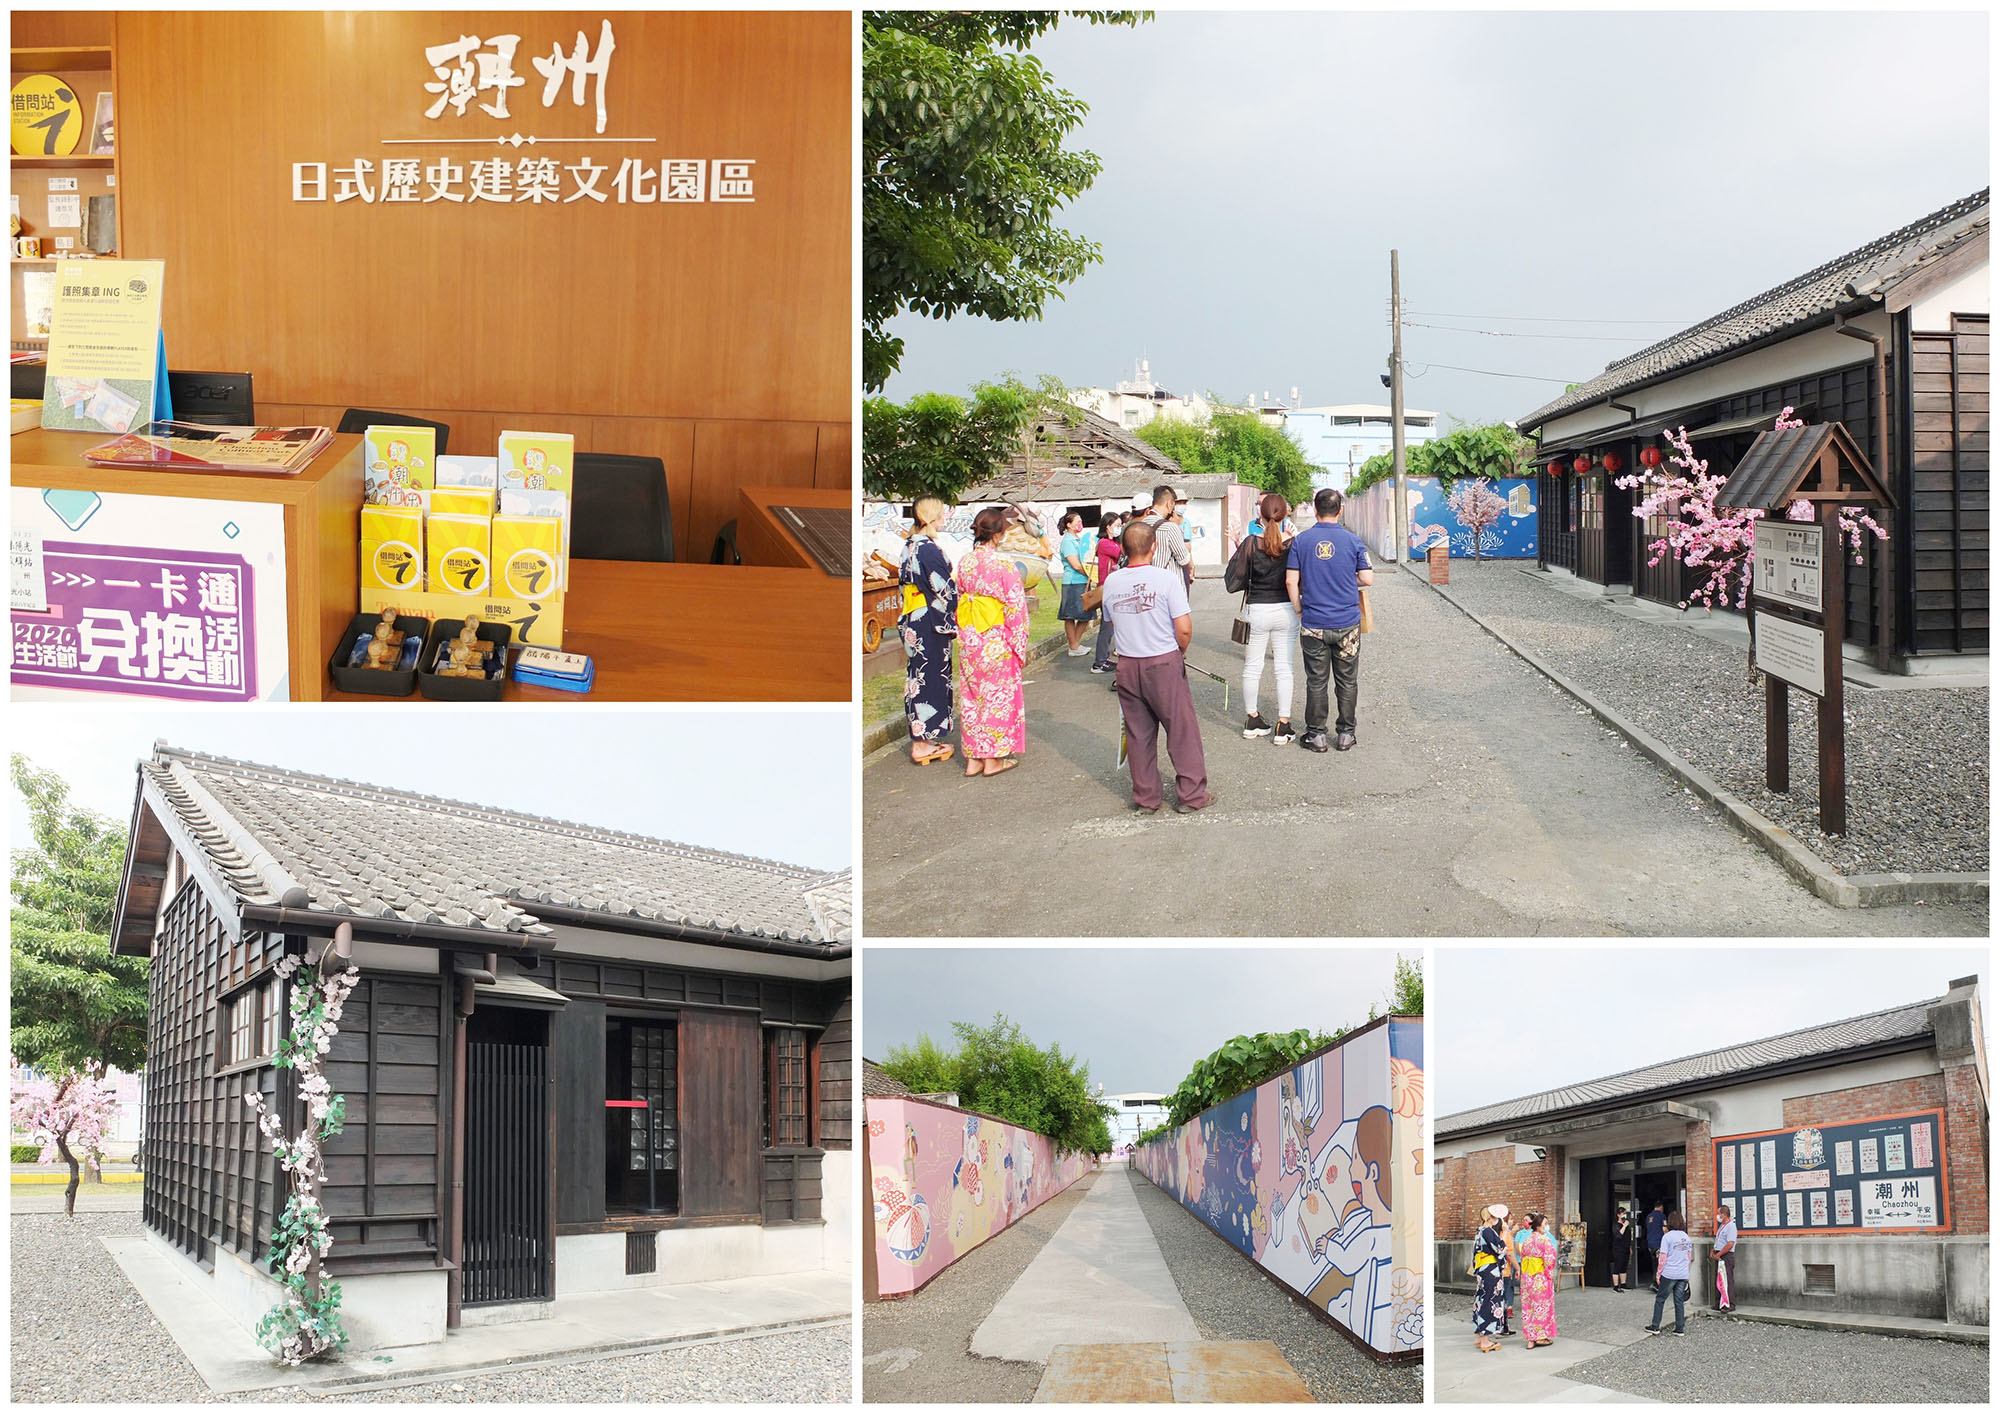 Chaozhou Japanese Historical Architecture Cultural Park